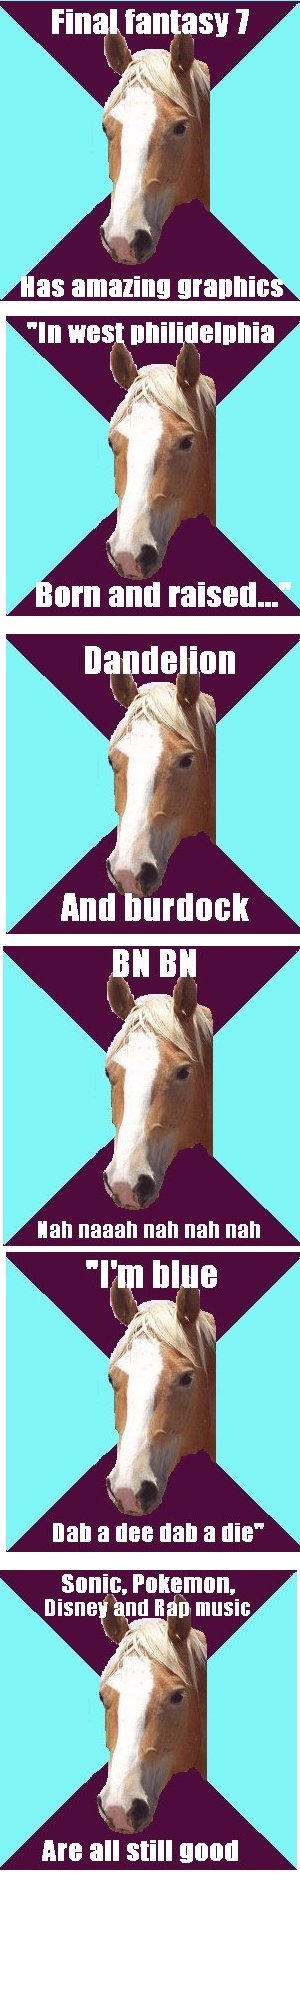 90's Horse 1. just a little sub-meme I whipped up. Tell me if you like/hate and any suggestions for a possibe next one.